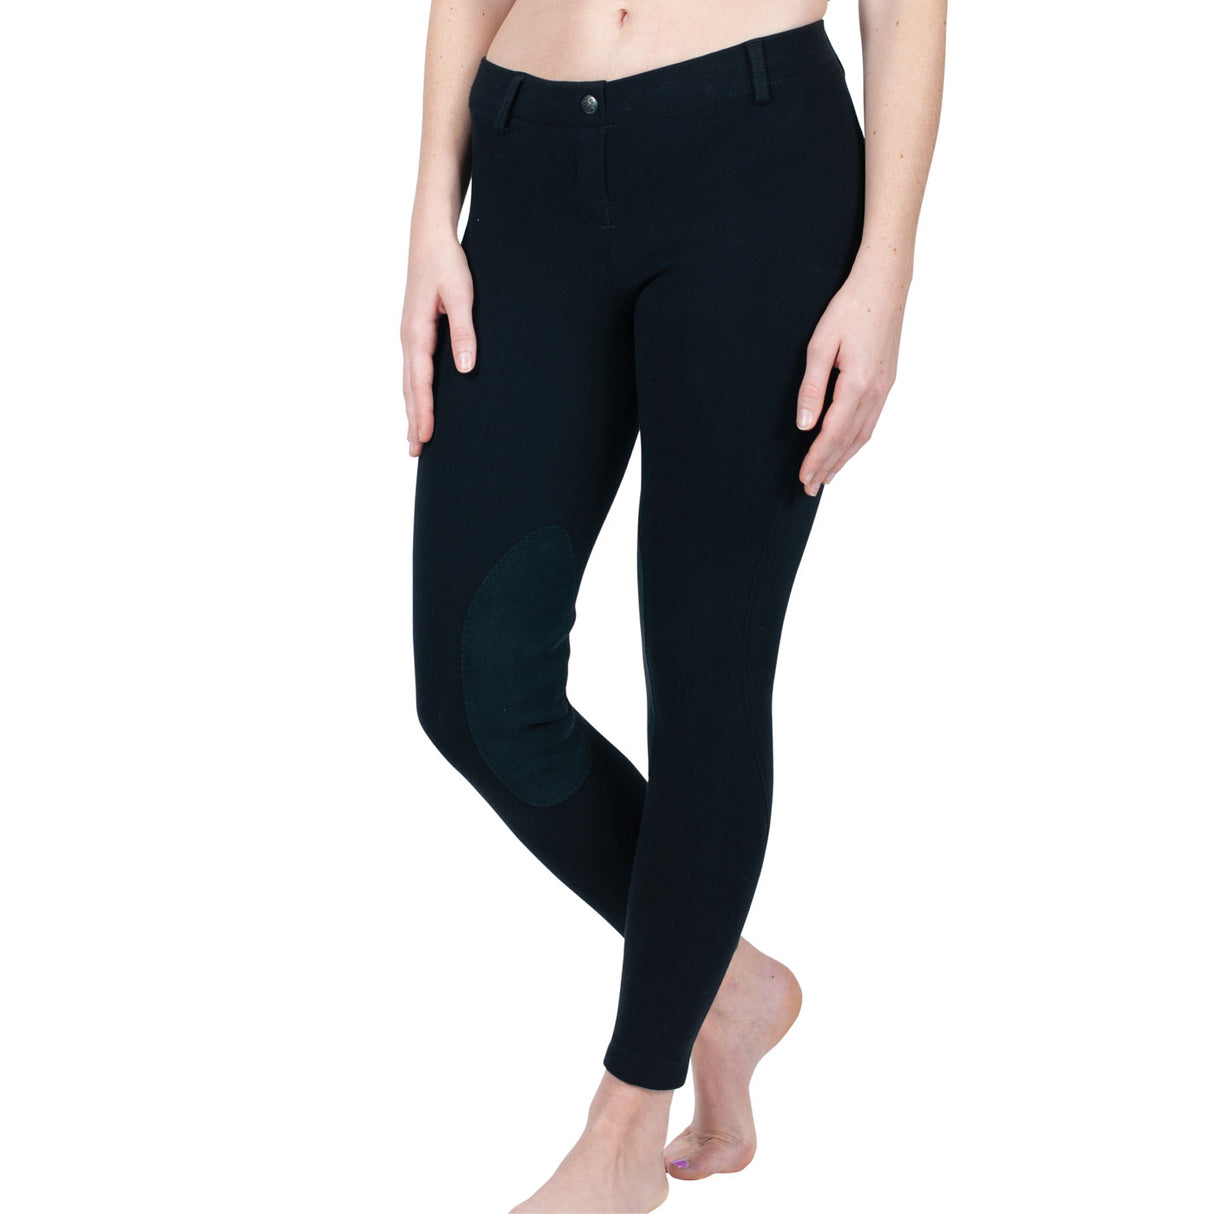 Route 15 High Waisted Workout Leggings for Women. 4 Way Stretch